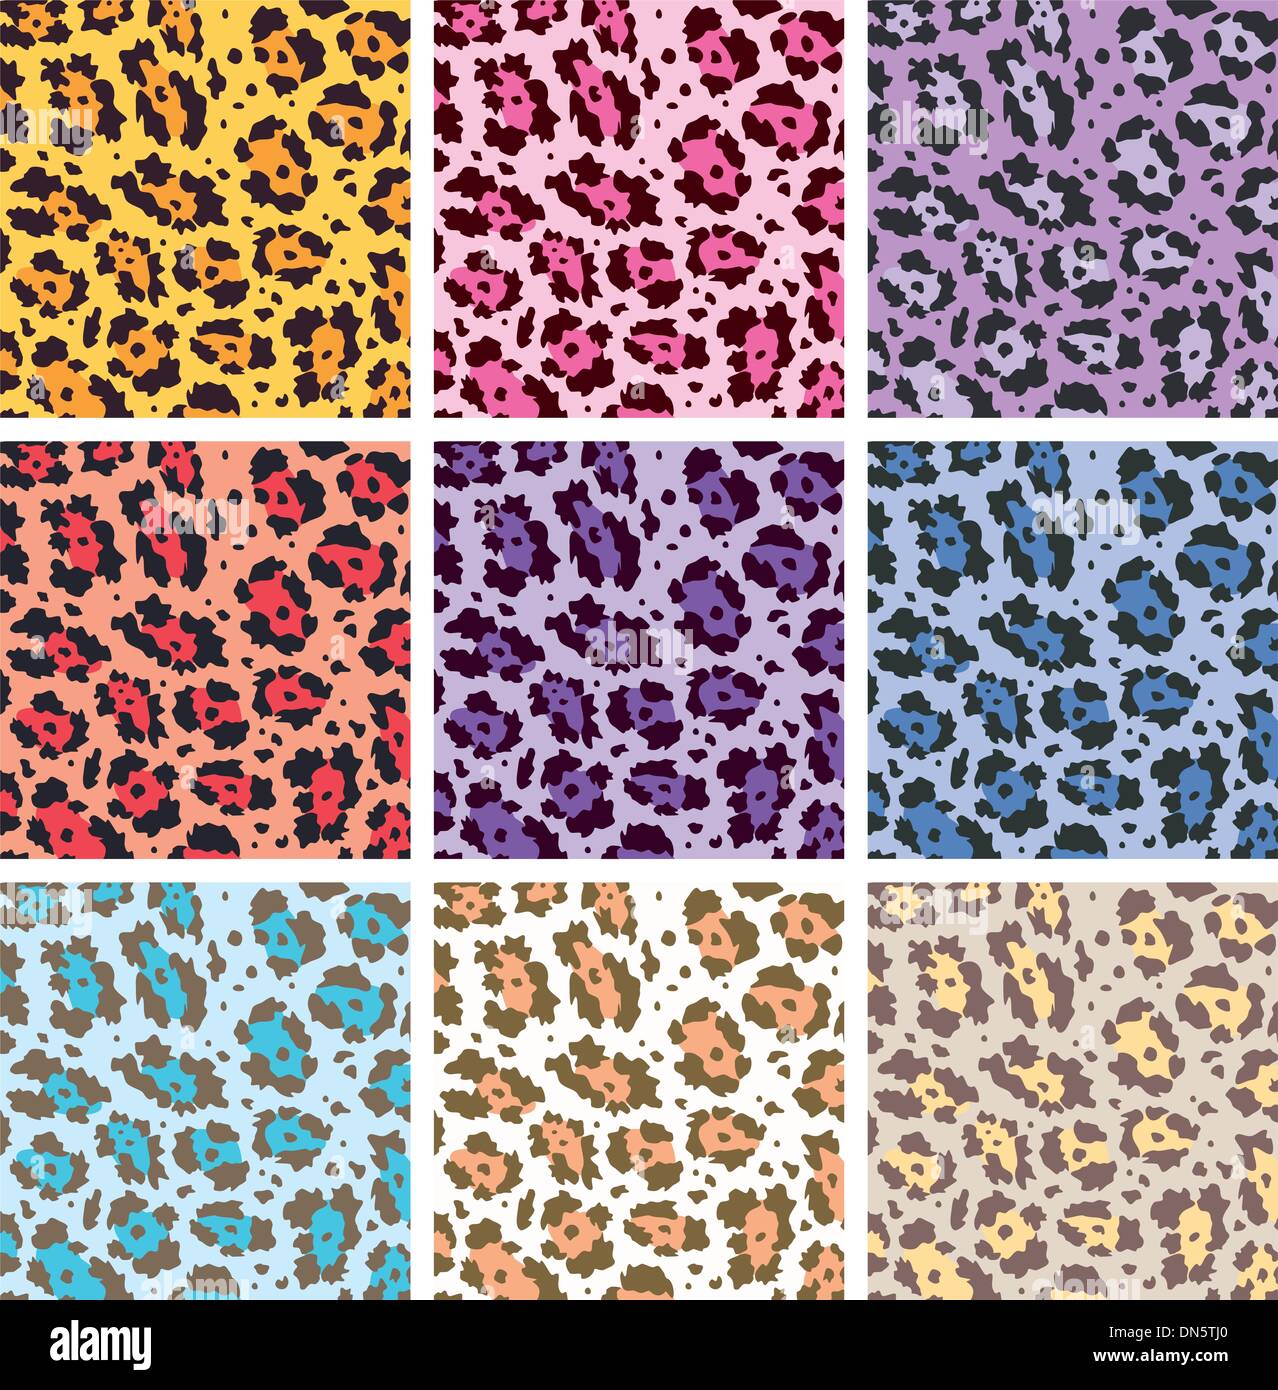 vector colorful animal skin textures of leopard Stock Vector